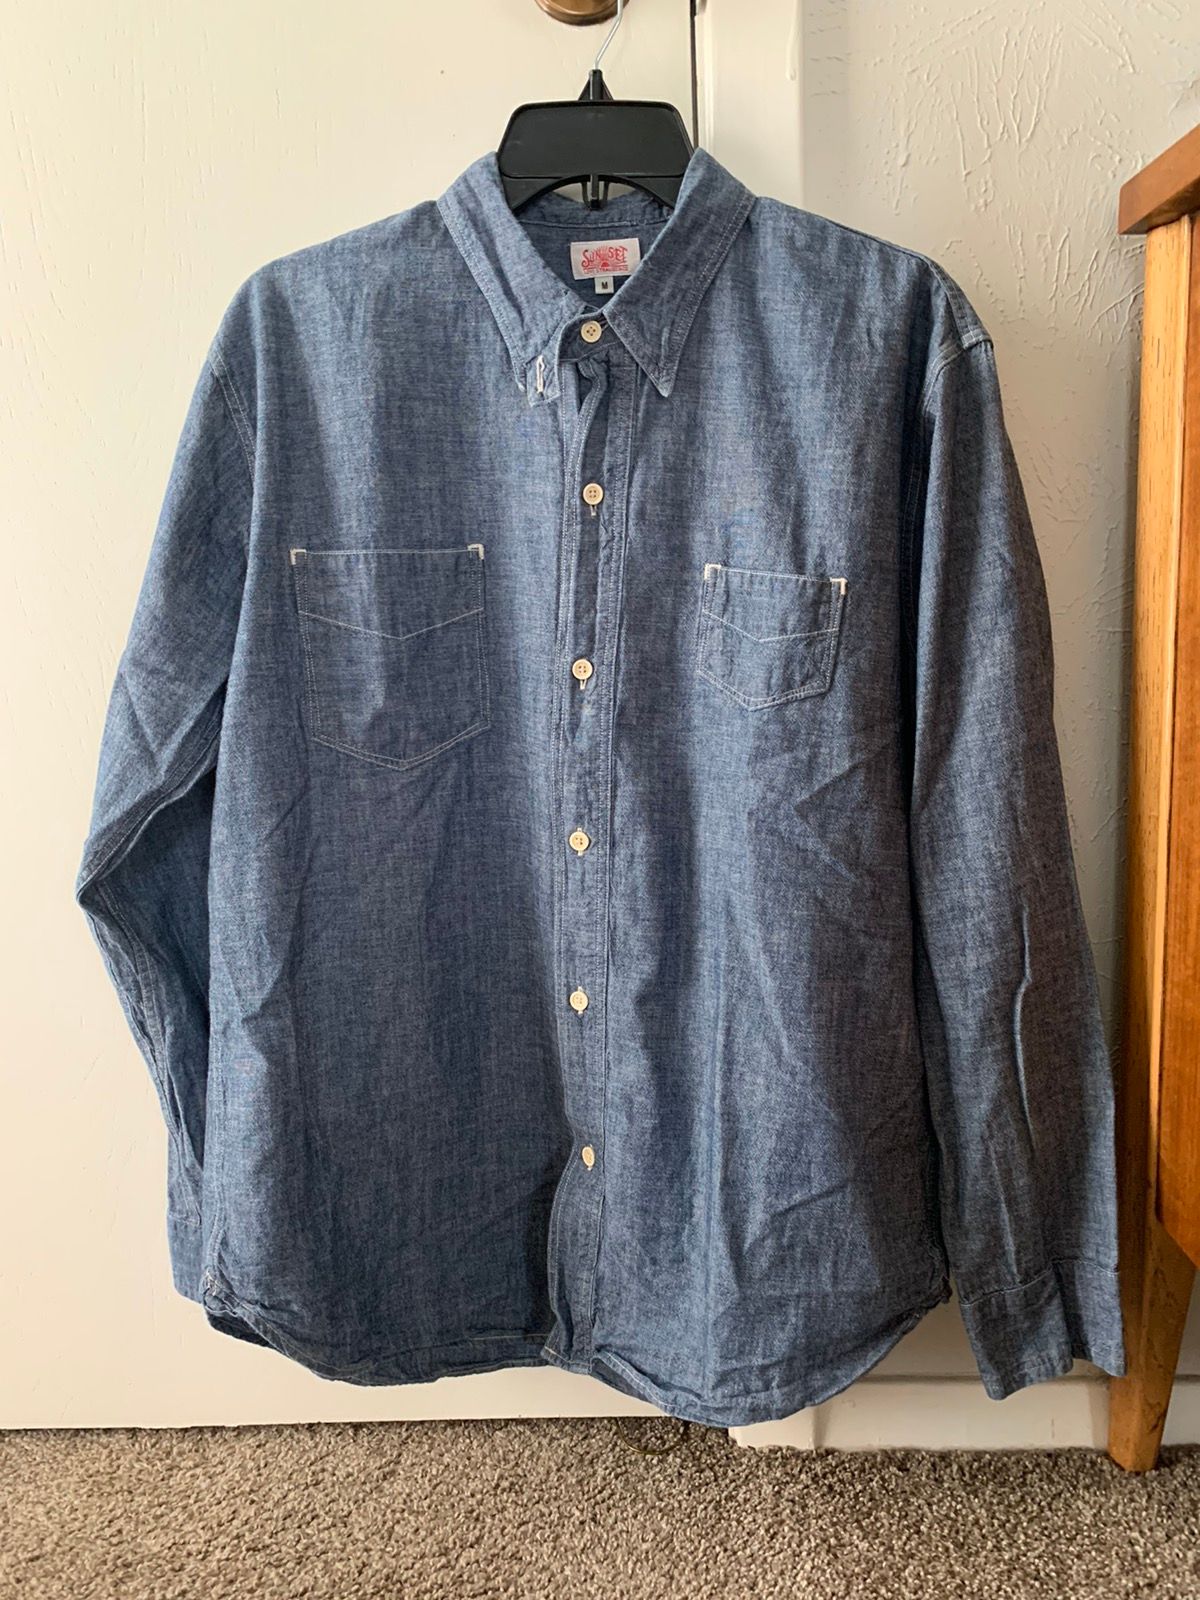 Levi's 1920’s Vintage Two Pocket Sunset Shirt Chambray | Grailed